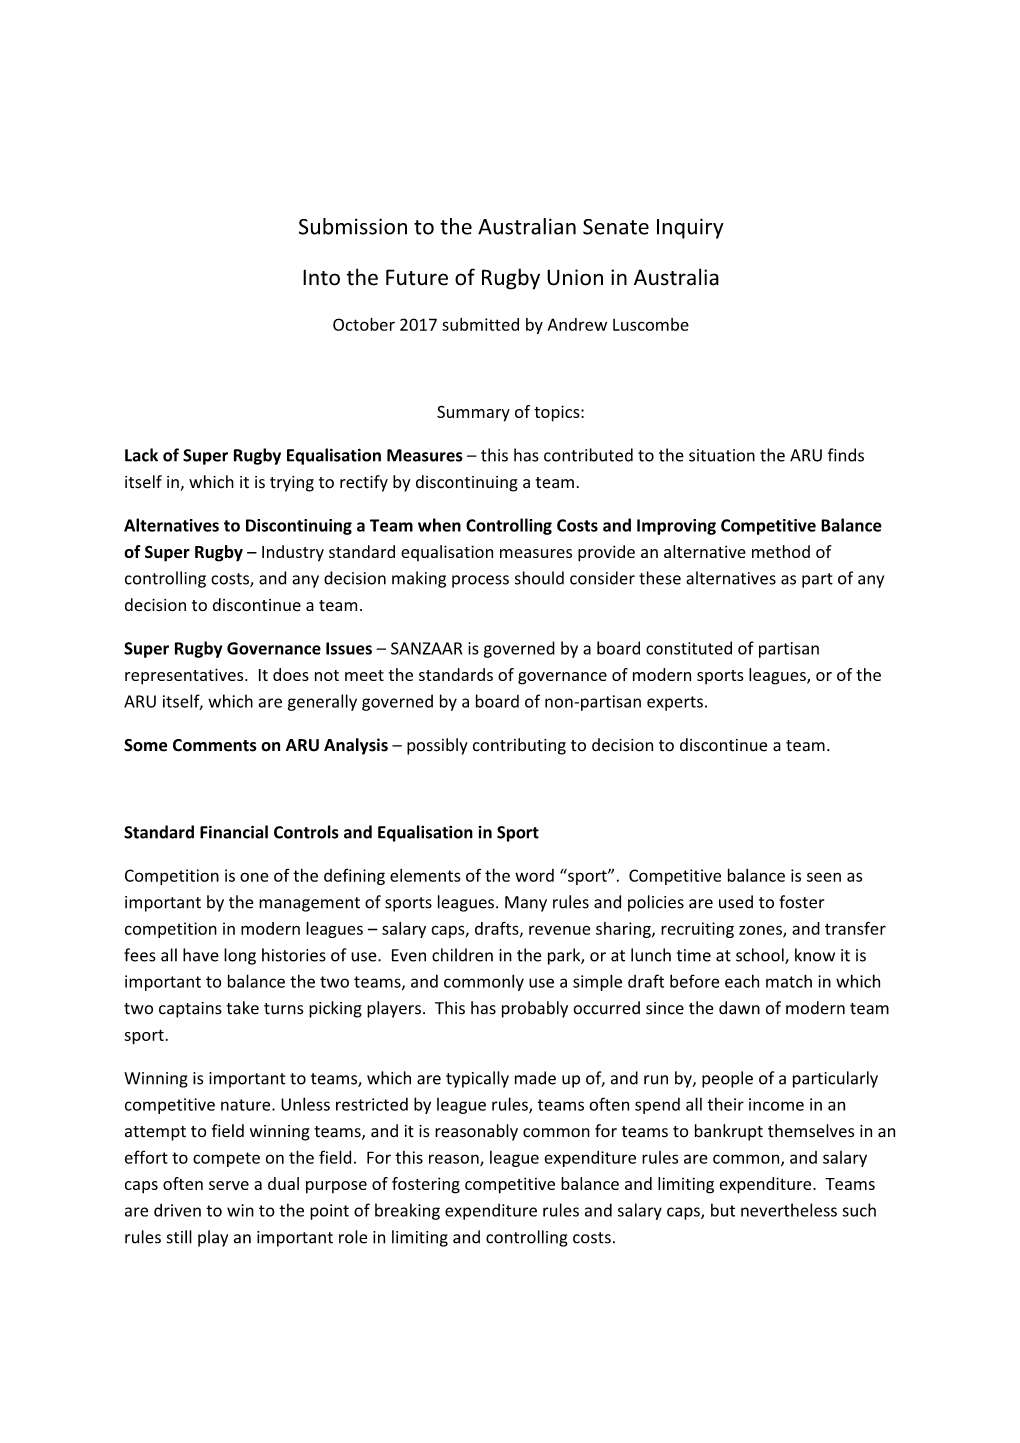 Submission to the Australian Senate Inquiry Into the Future of Rugby